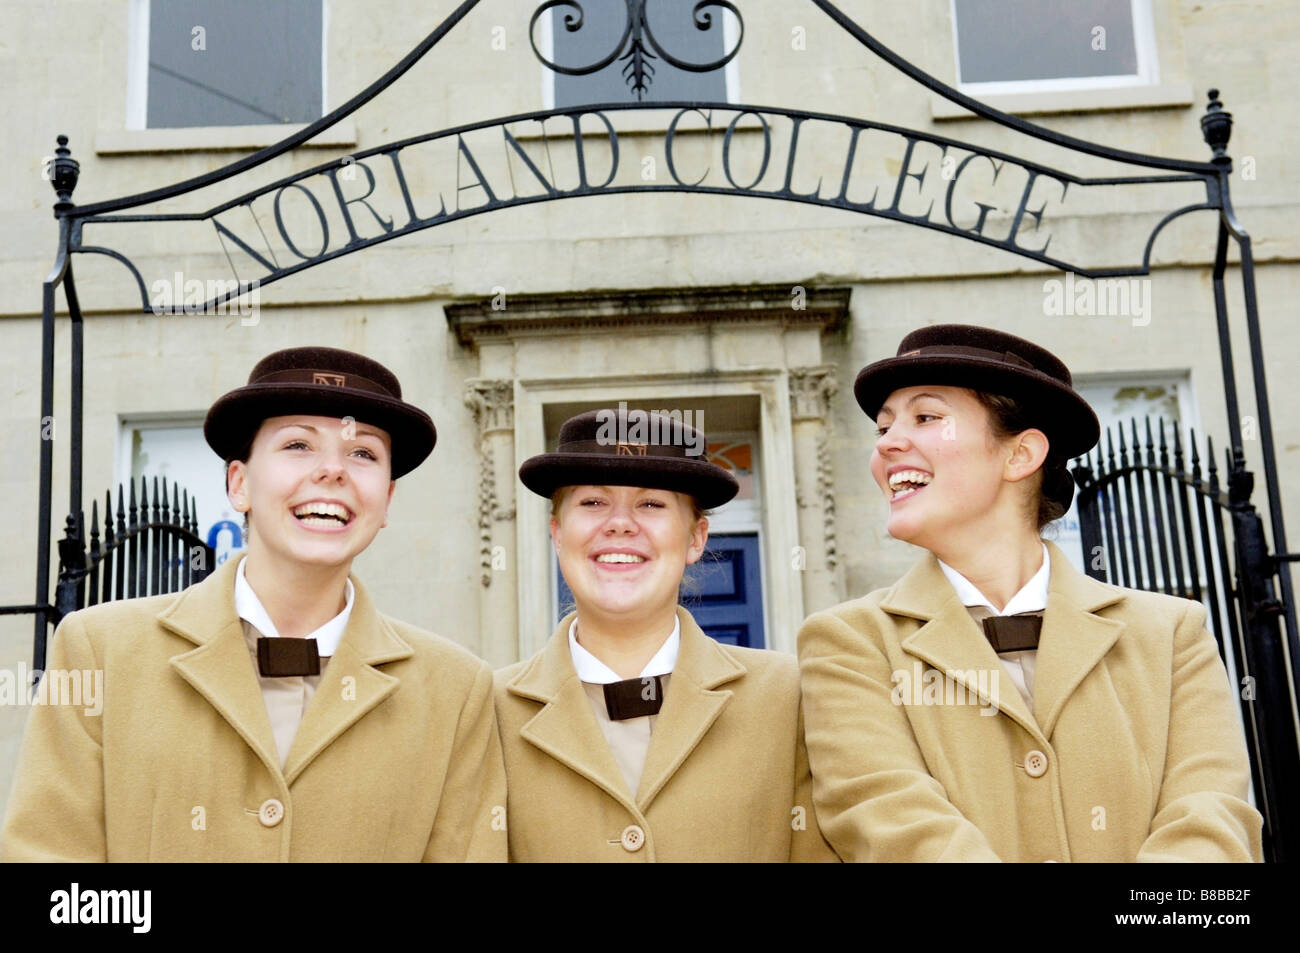 three-norland-nannies-in-uniform-pictured-outside-norland-college-B8BB2F.jpg